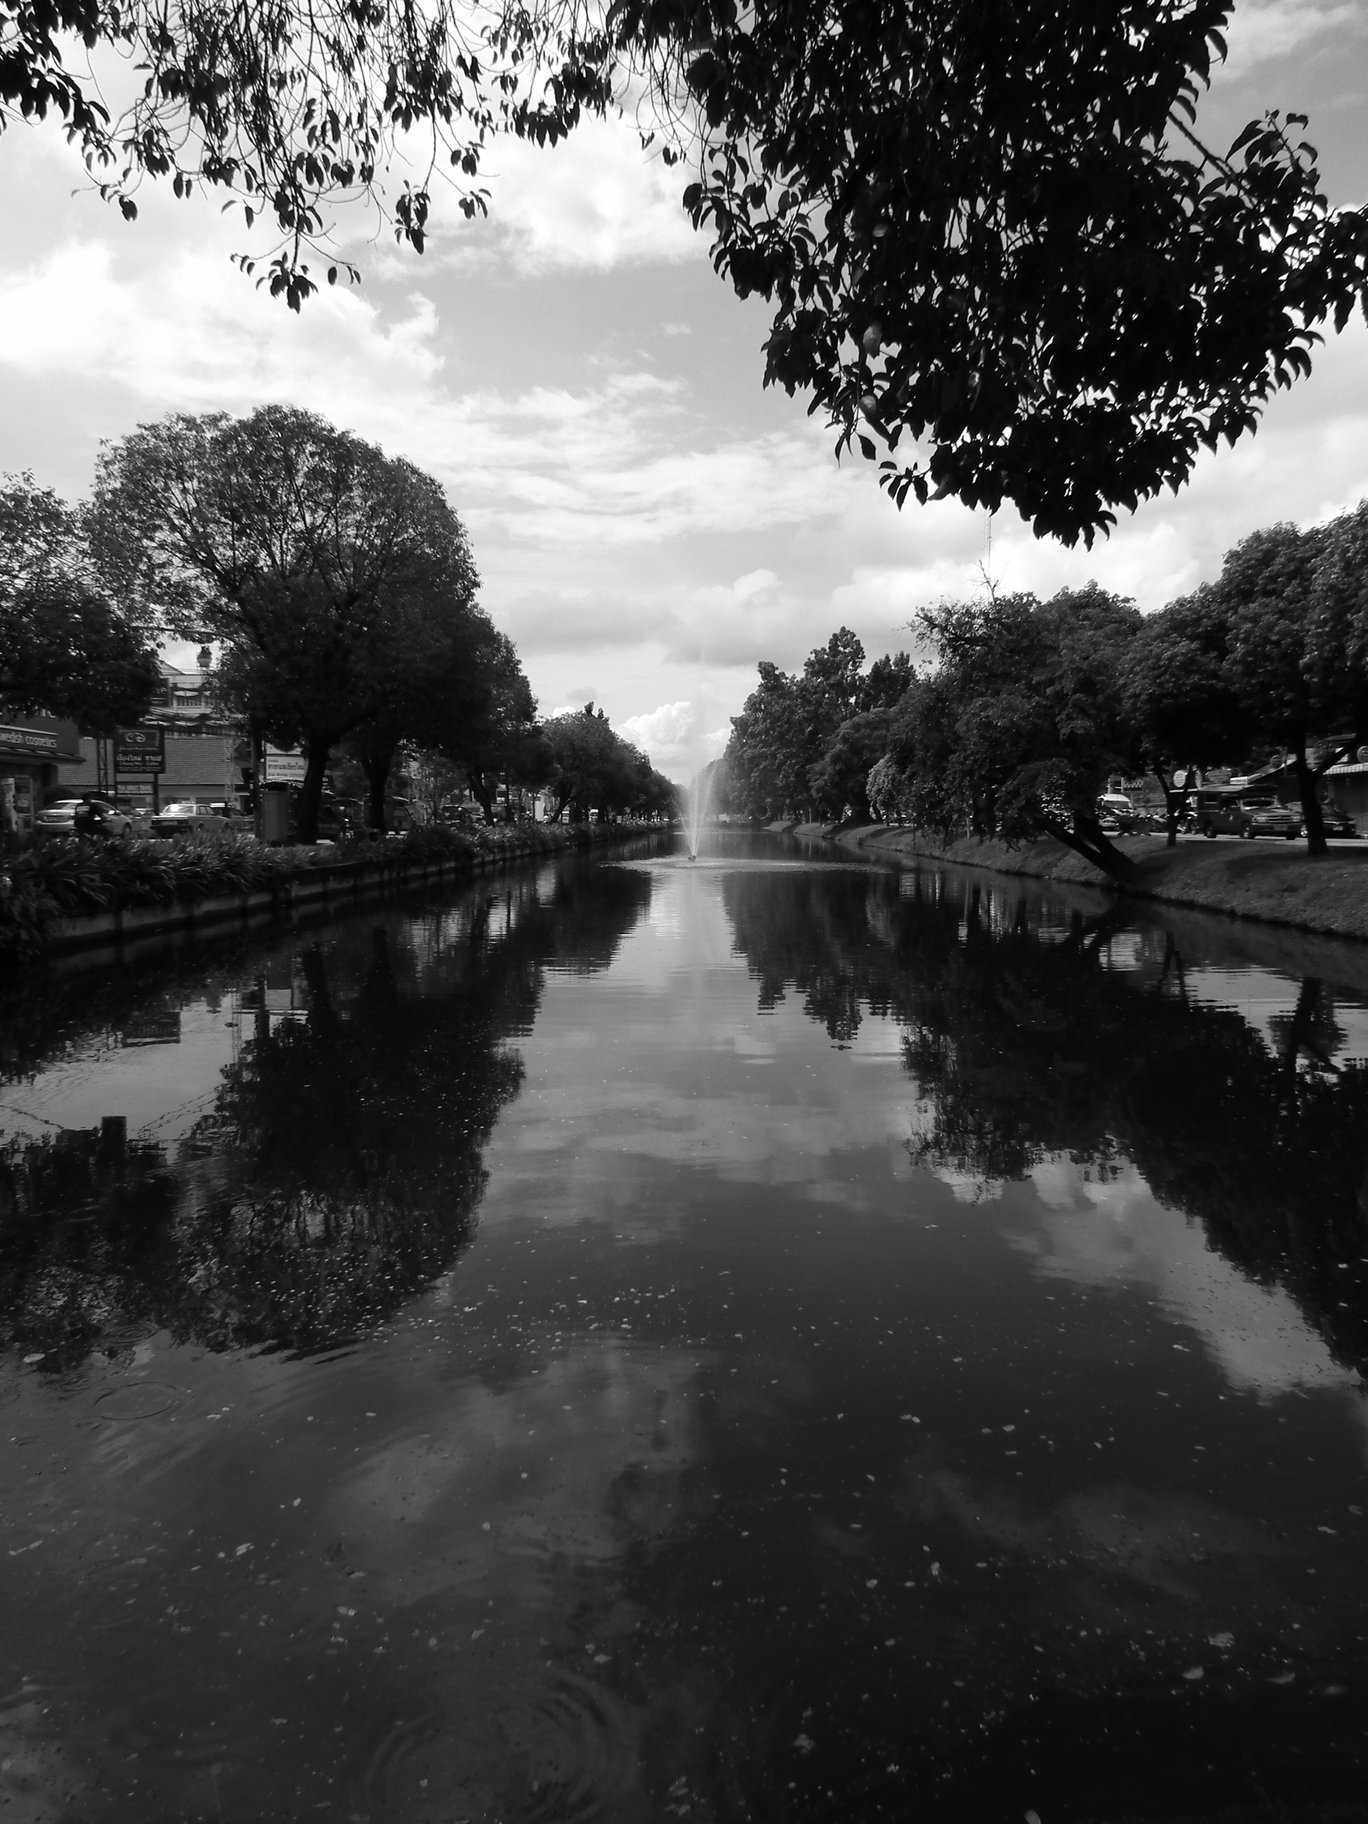 Reflections On The River - Scenery, Water | River | Tree | Sky | Cloud | Black and White